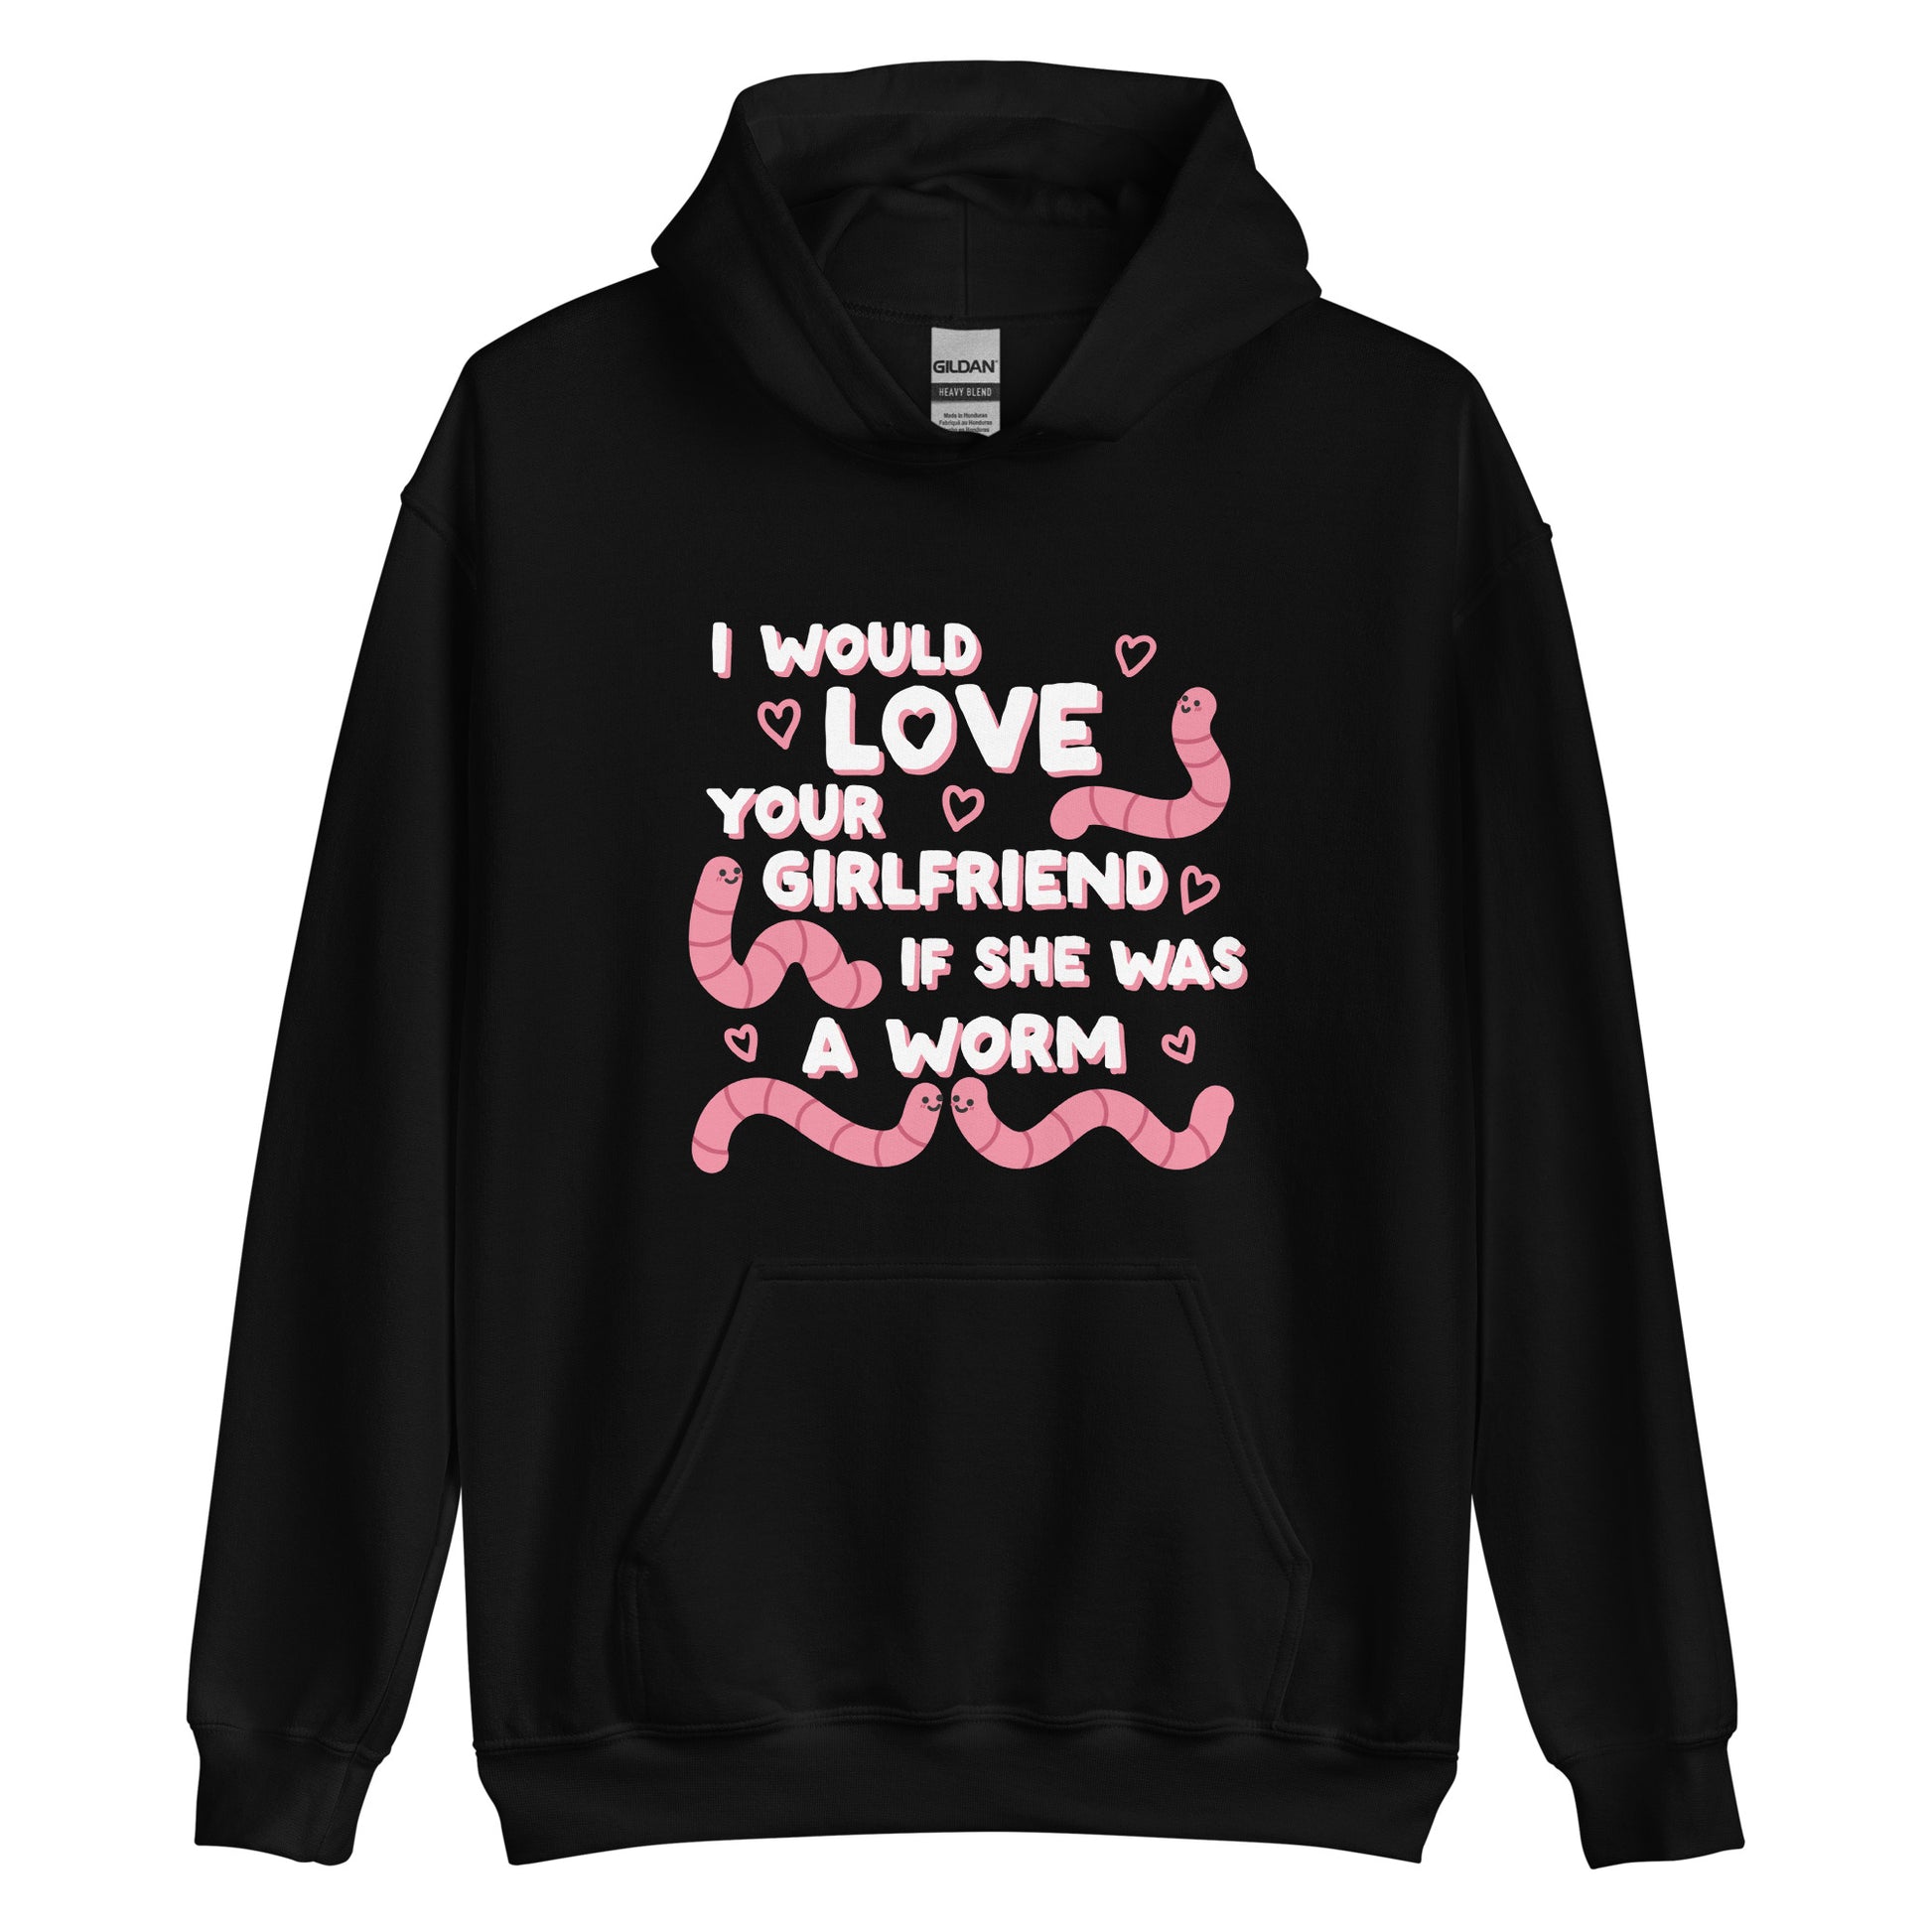 A black hooded sweatshirt featuring text that reads "I would love your girlfriend if she was a worm". Cute cartoon worms and hearts surround the text.